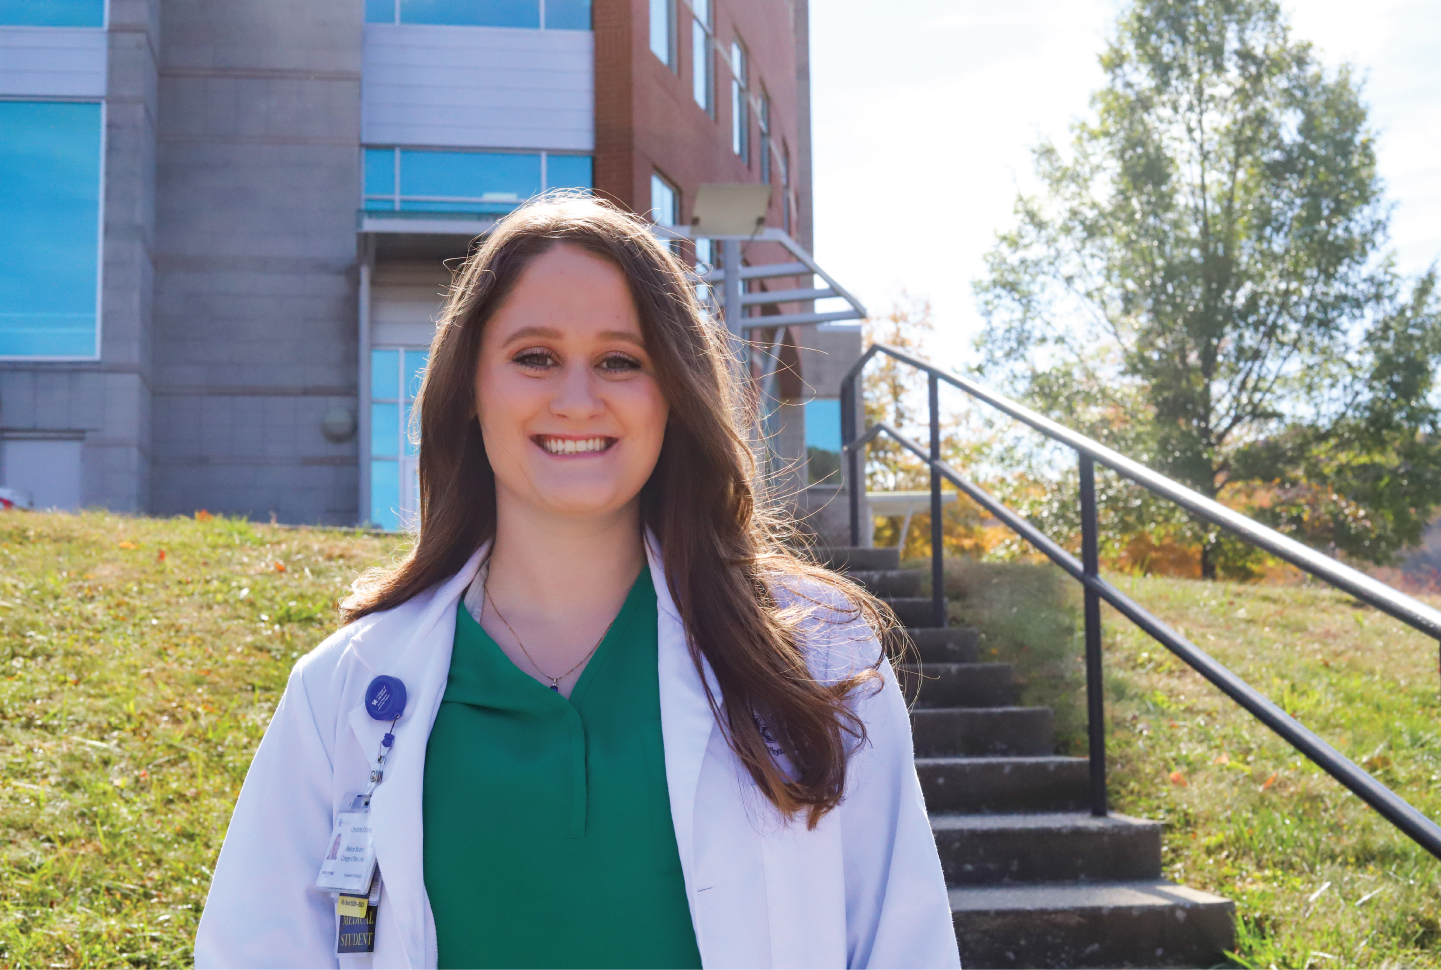 student in a white coat stands in front of Morehead campus